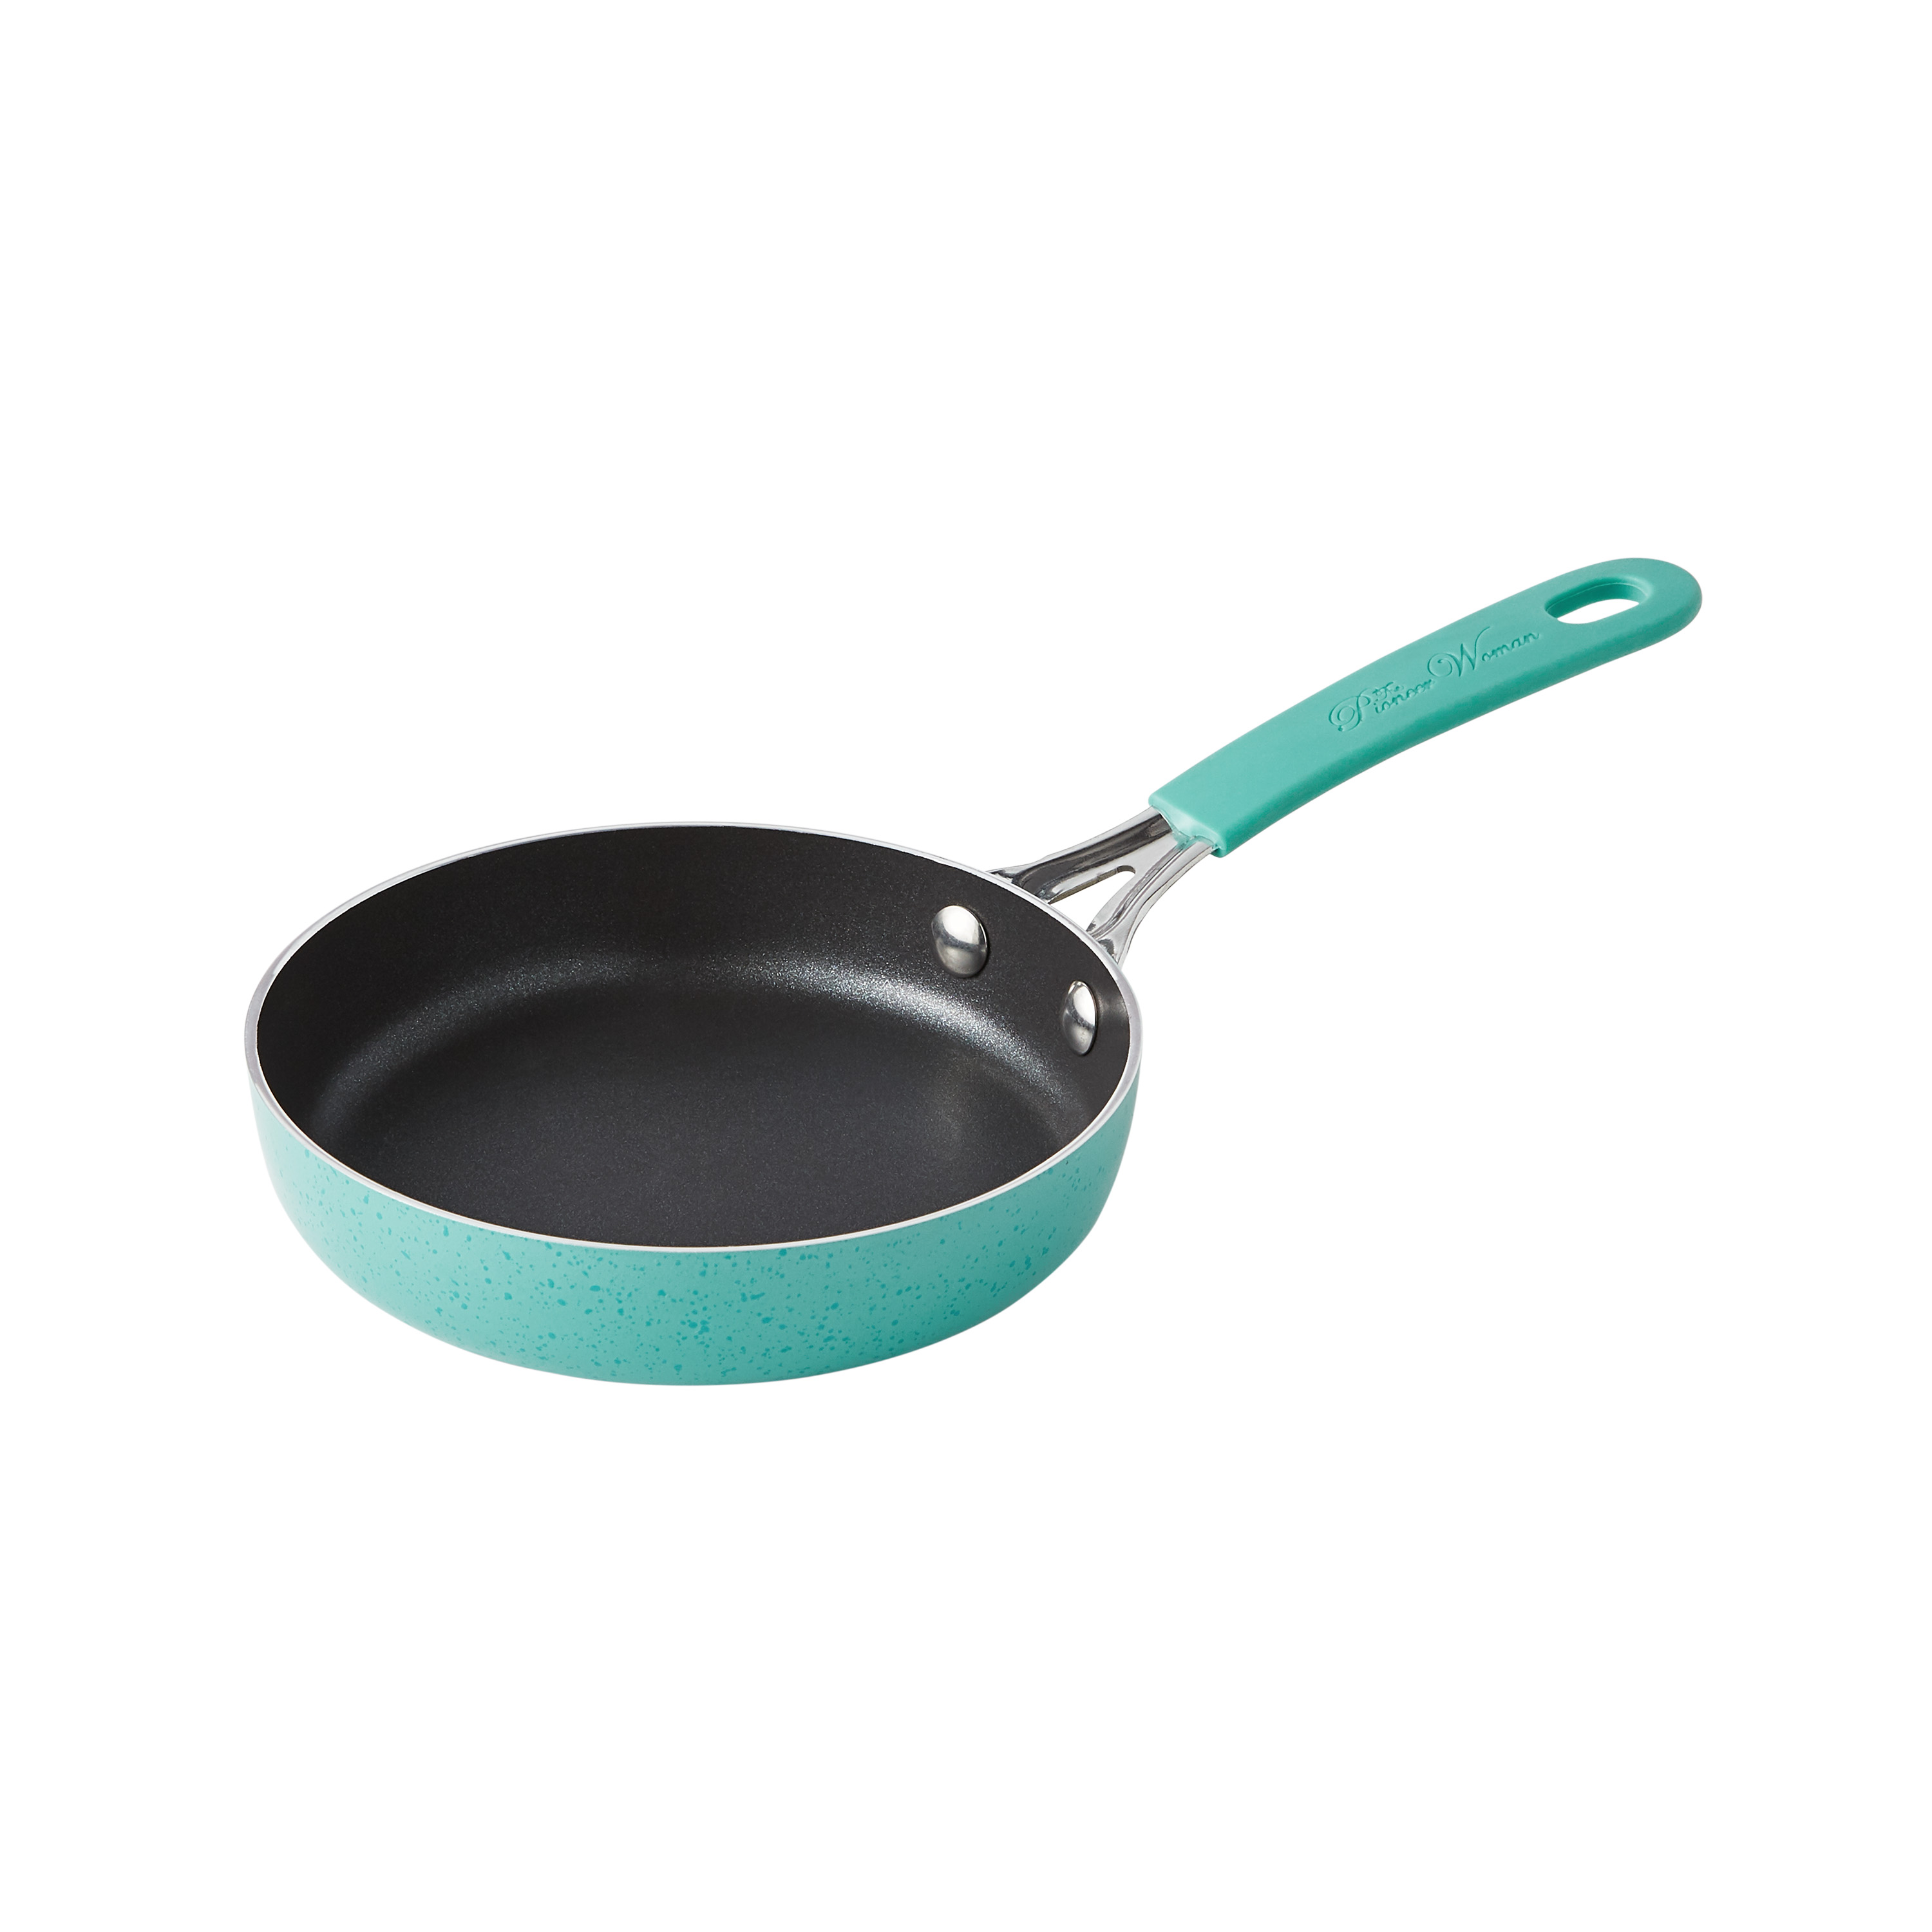 The Pioneer Woman Blooming Bouquet Aluminum Nonstick 19-Piece Cookware Set, Teal - image 9 of 11